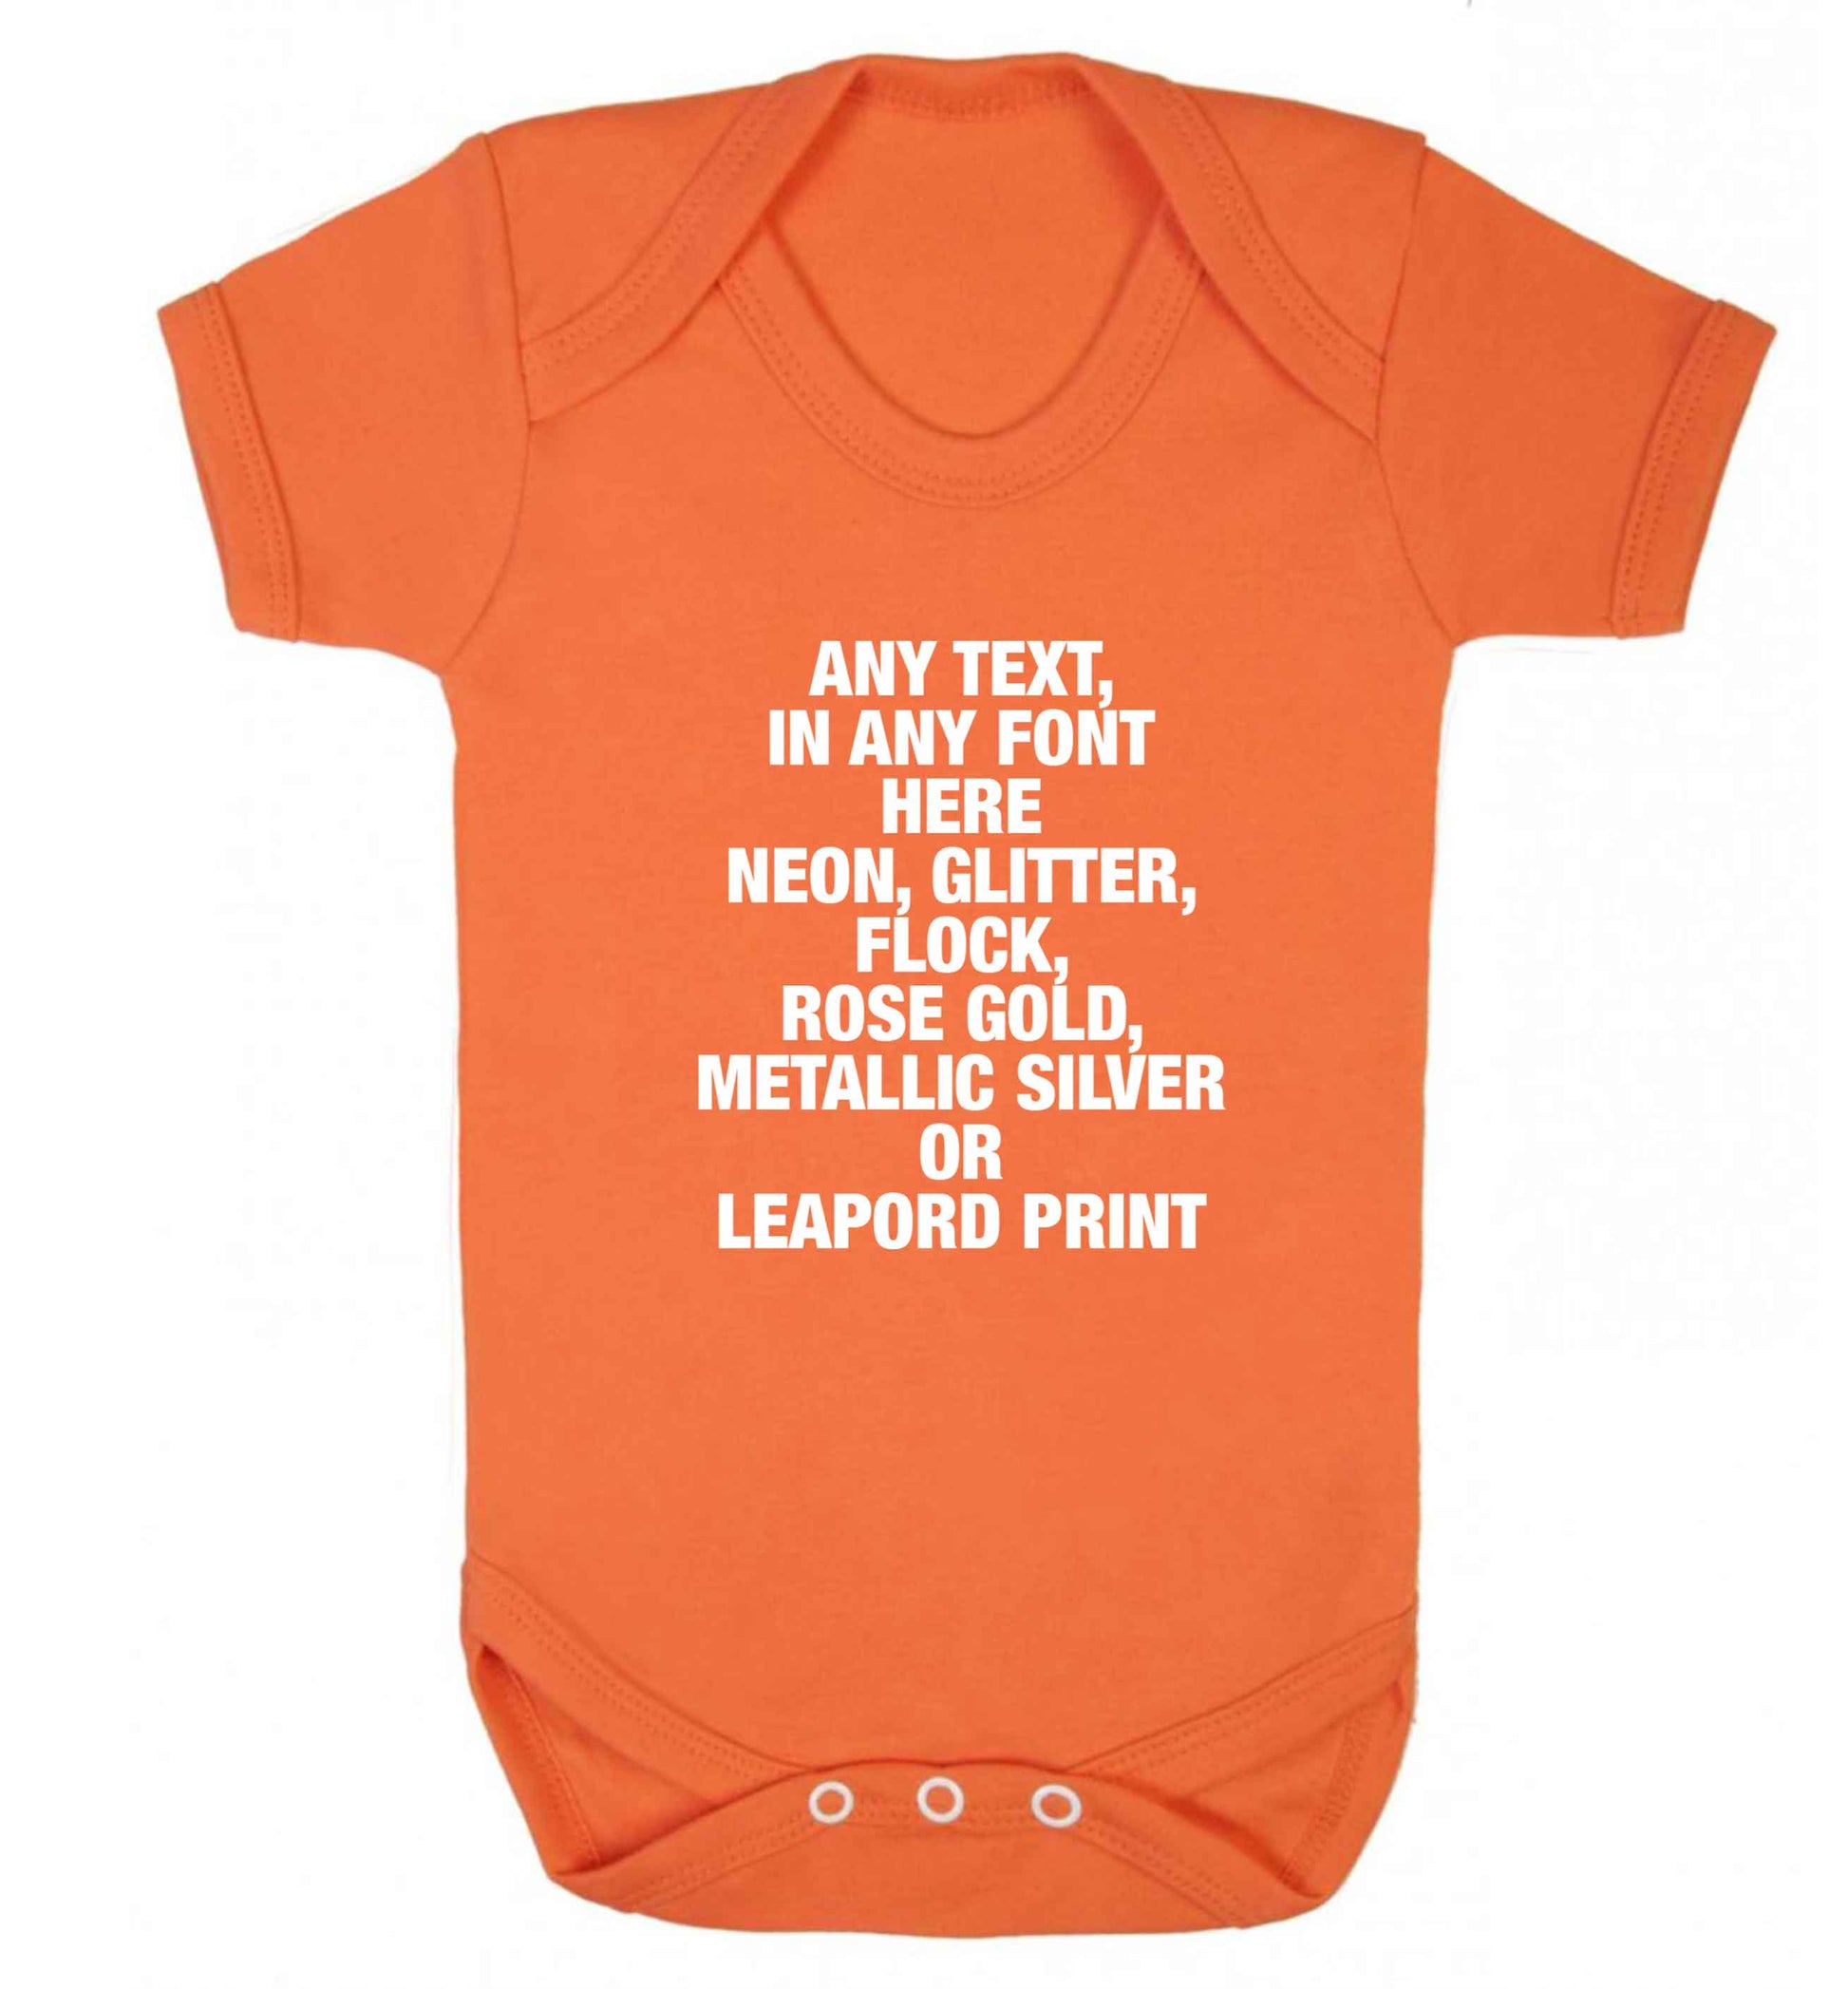 Premium custom order any text colour and font baby vest orange 18-24 months